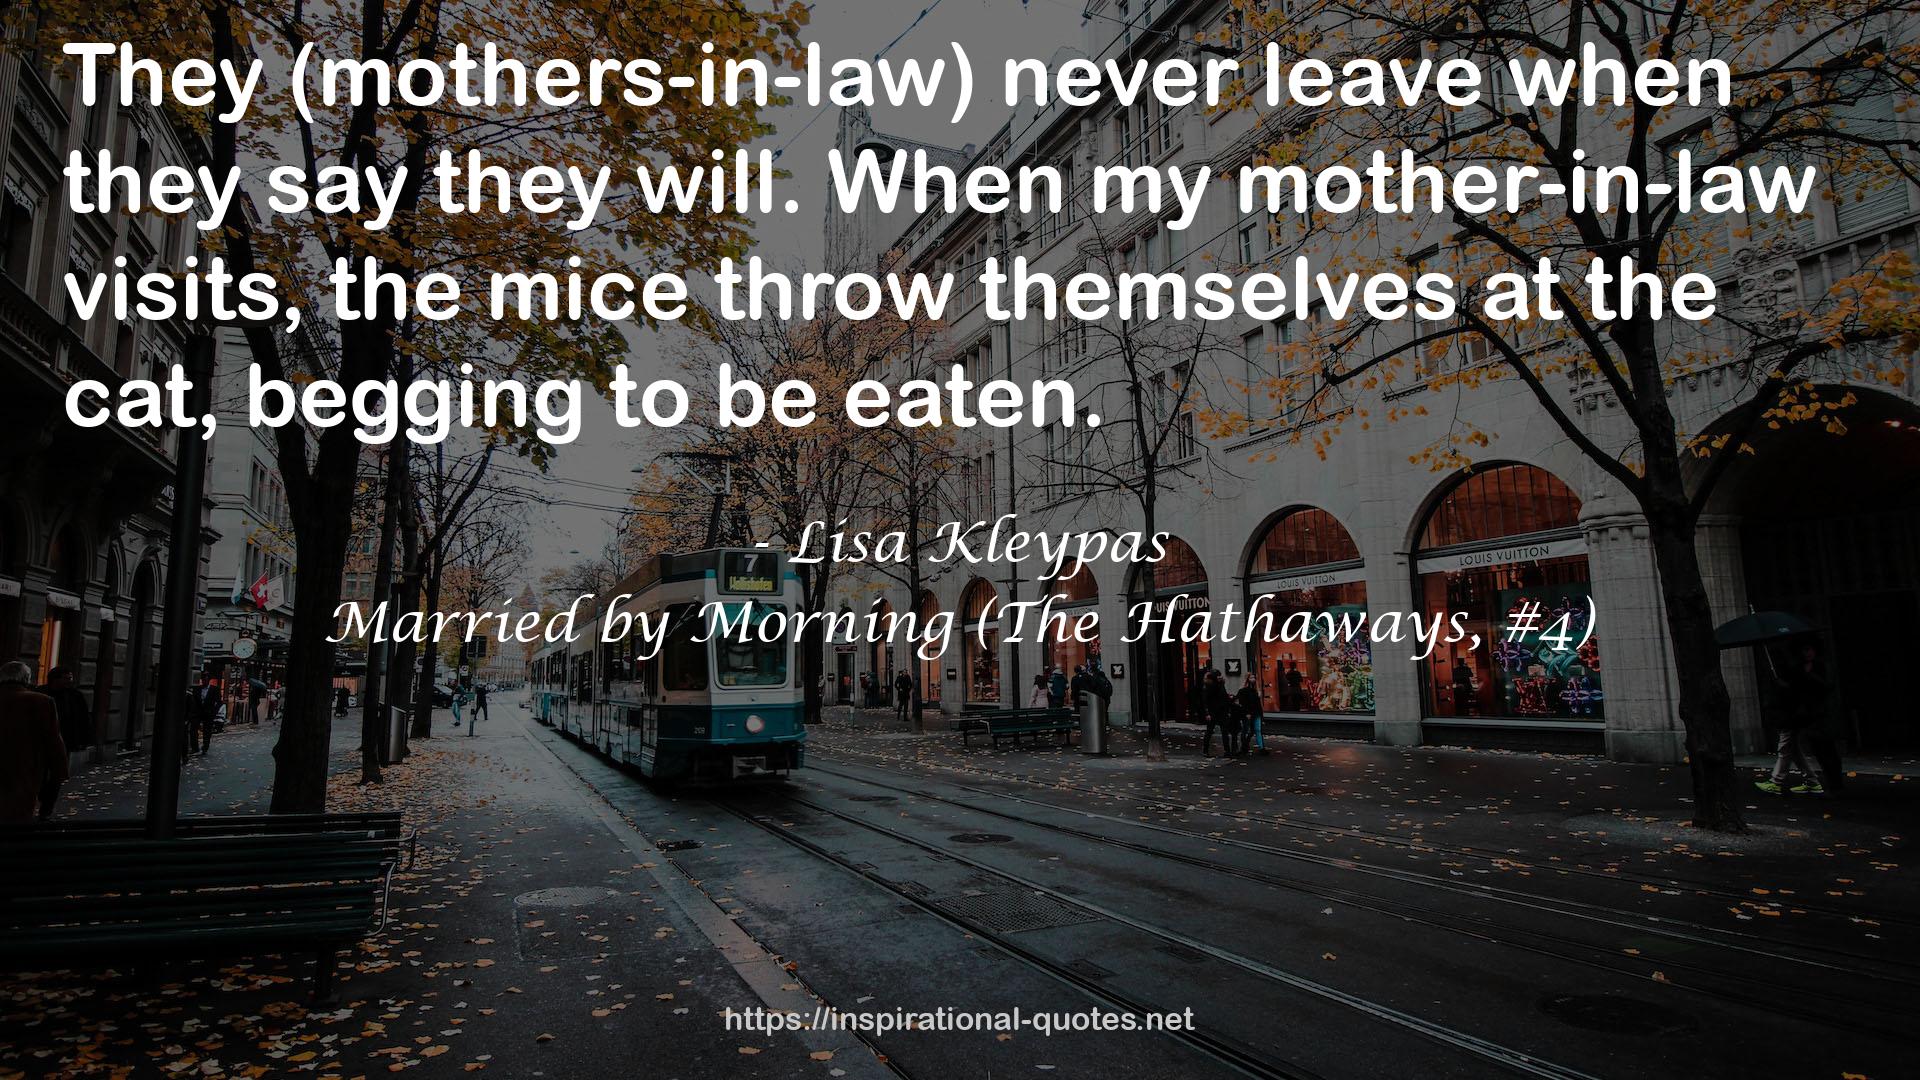 Lisa Kleypas QUOTES